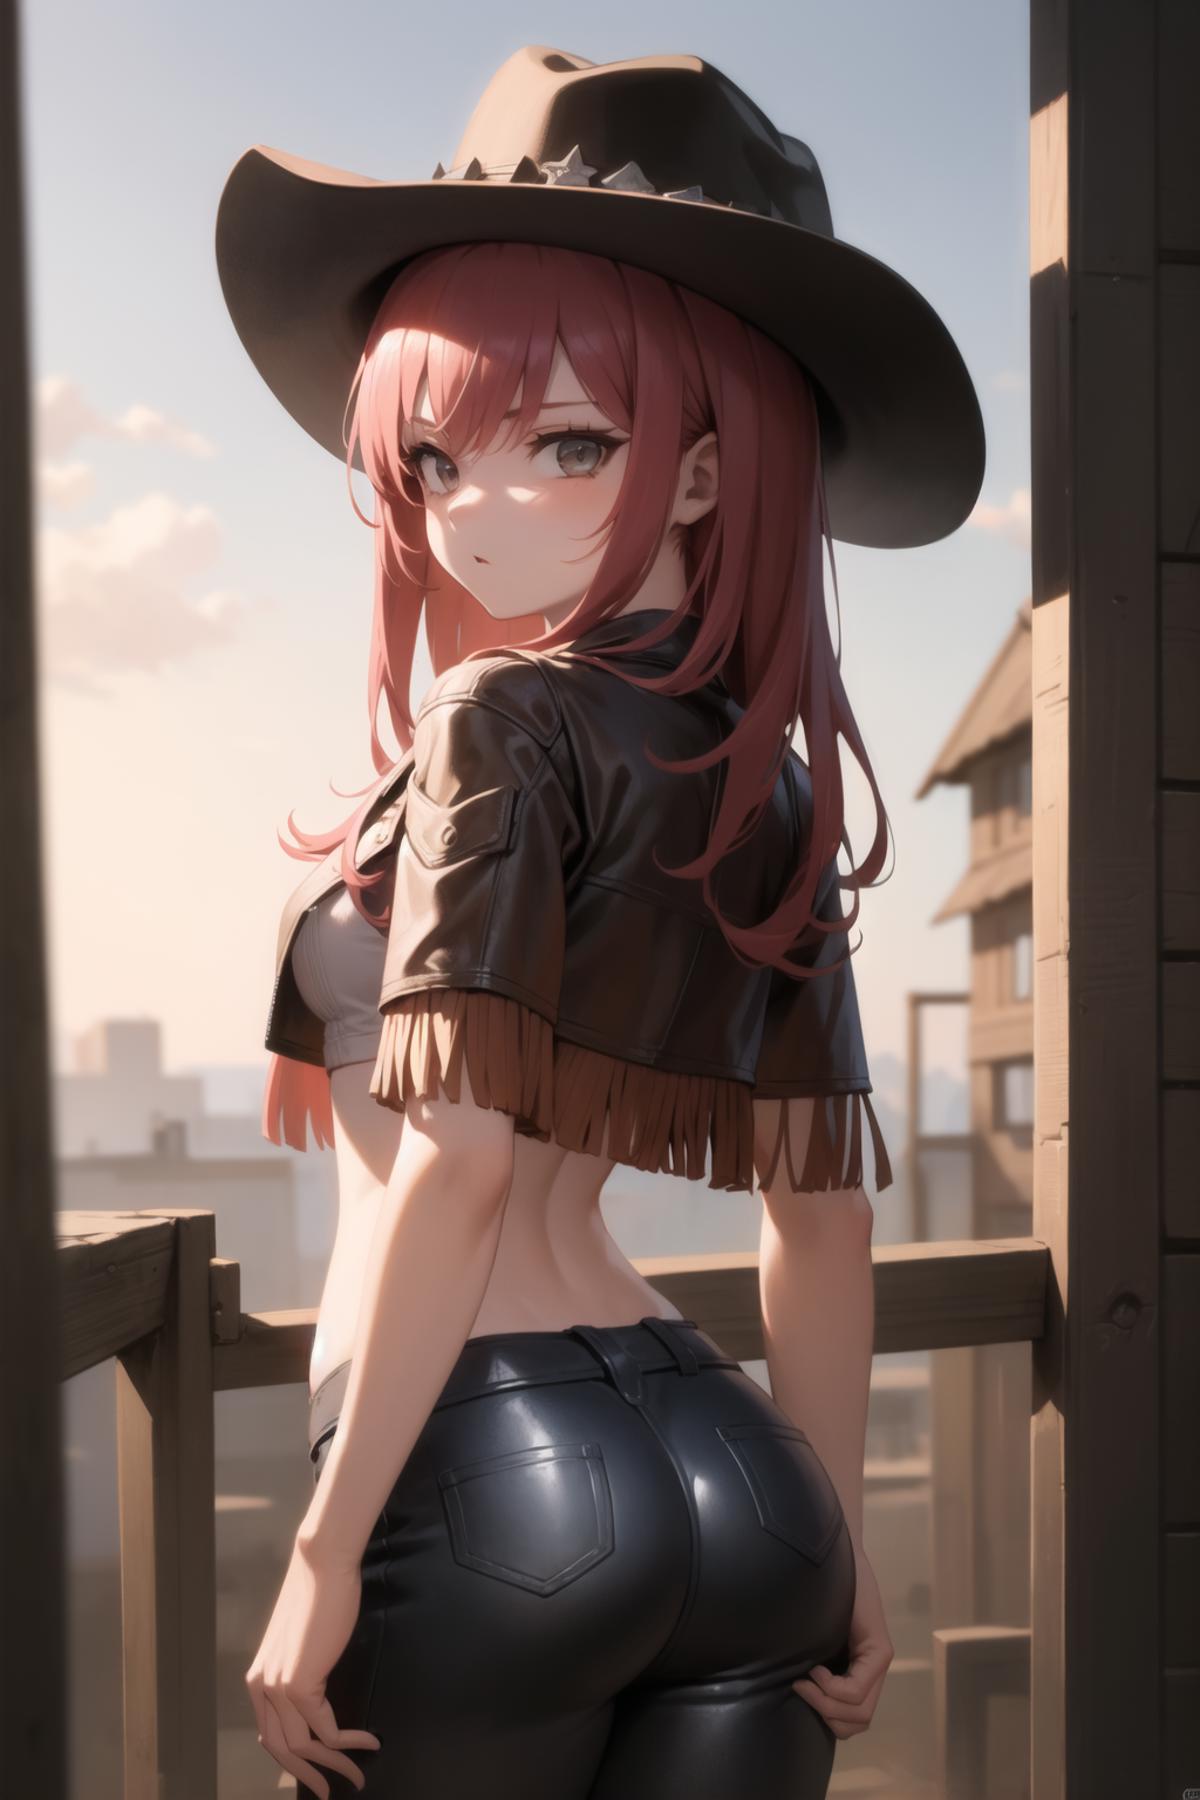 Cowgirl outfit image by psoft